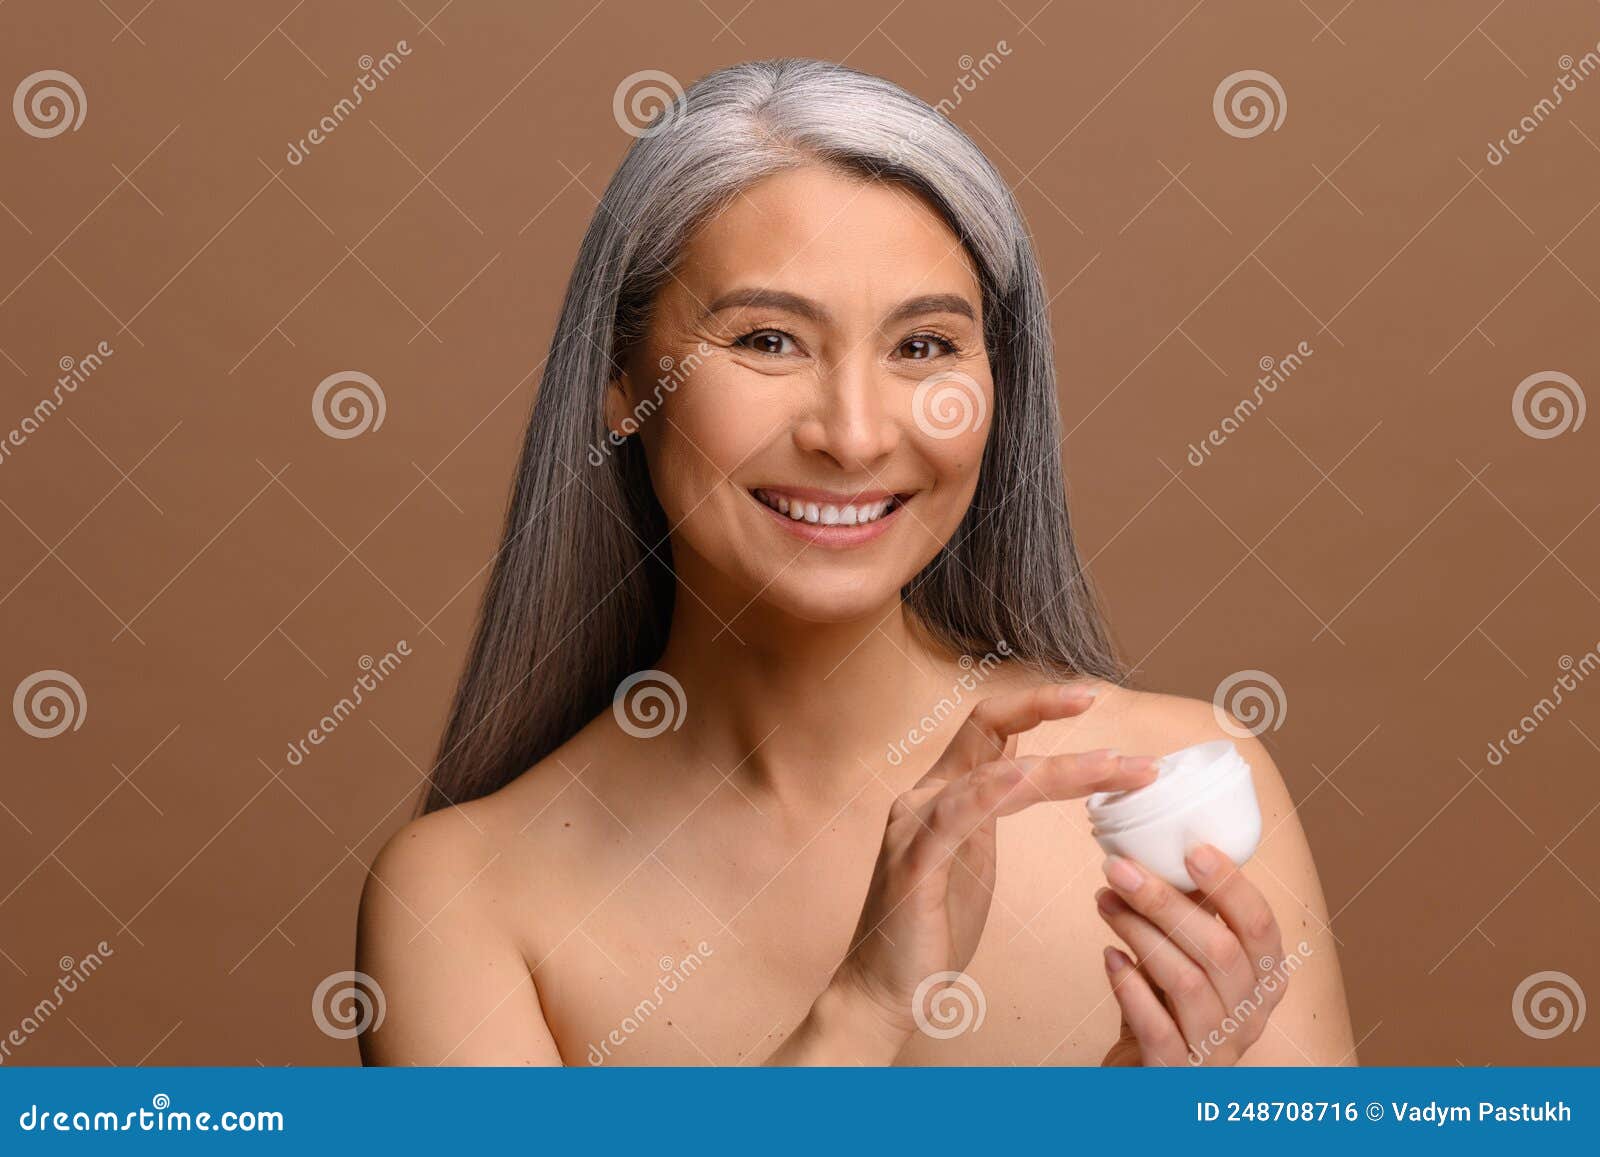 Topless Middle Age Woman Stock Photos - Free & Royalty-Free